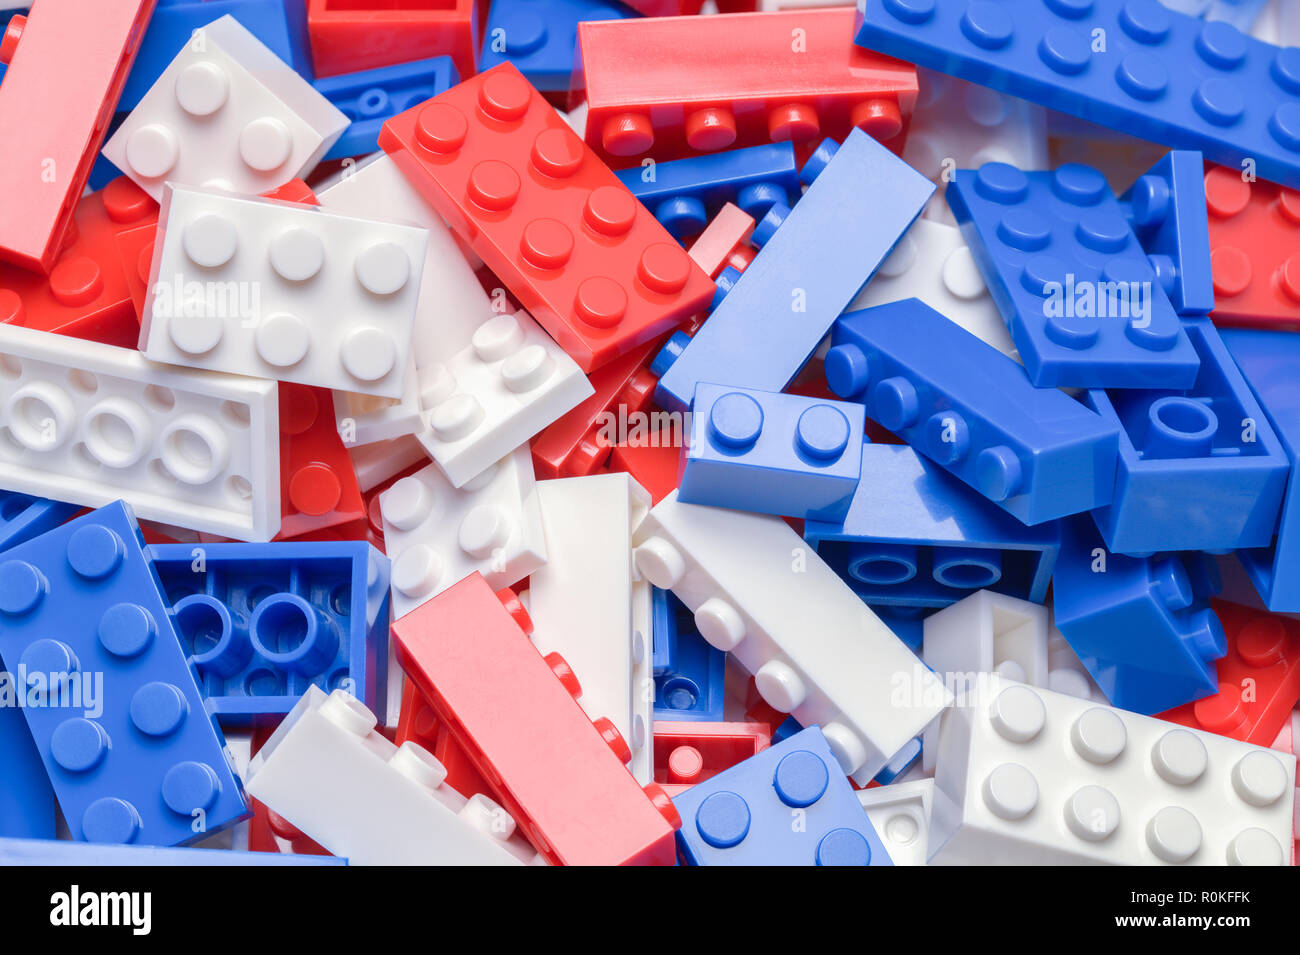 Pile of Red, White and Blue Toy Plastic Building Blocks. Stock Photo